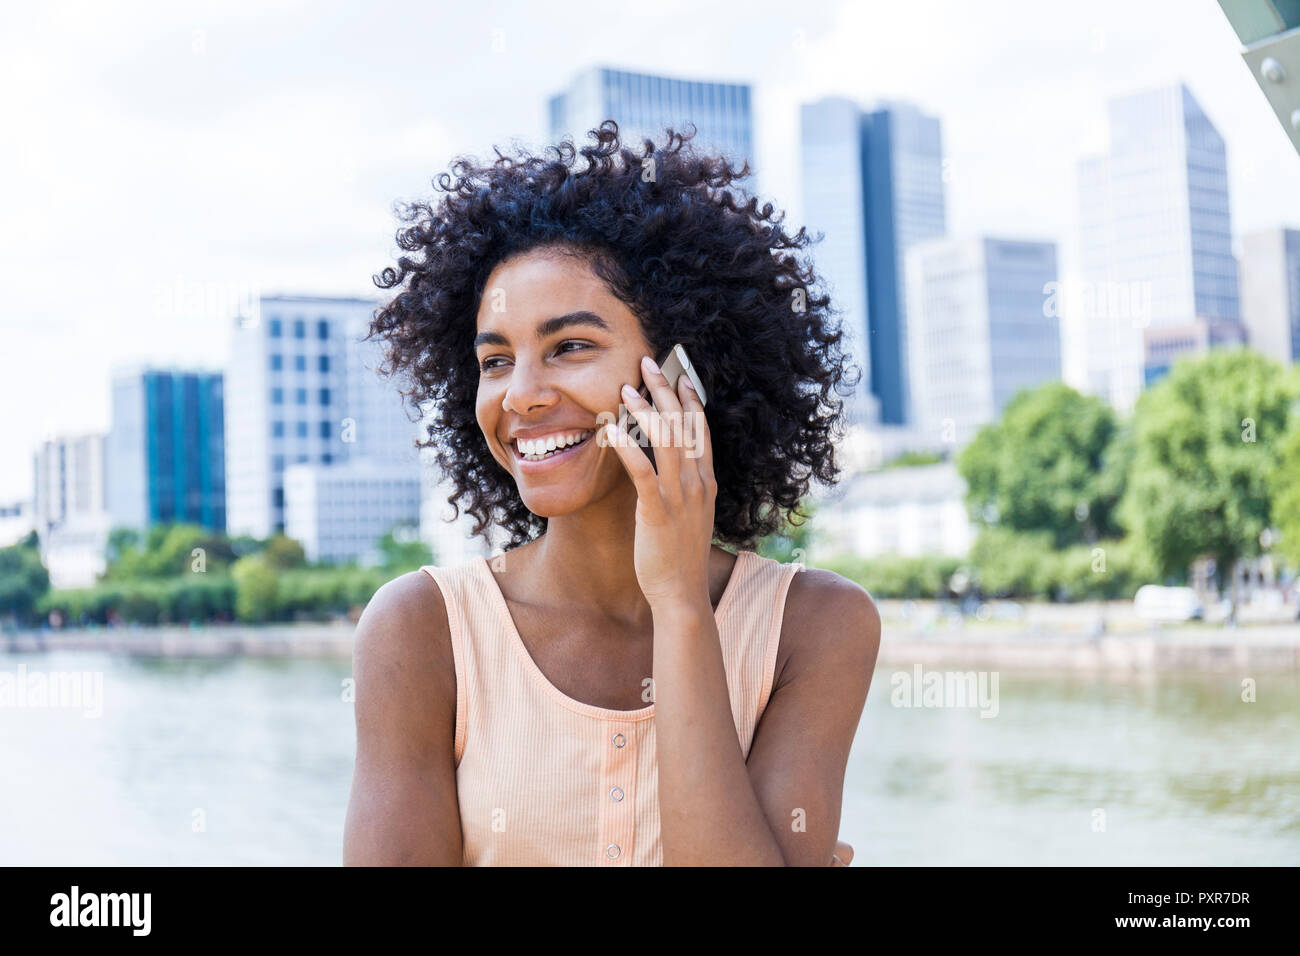 Germany, Frankfurt, portrait of smiling young woman with curly hair on the phone Stock Photo